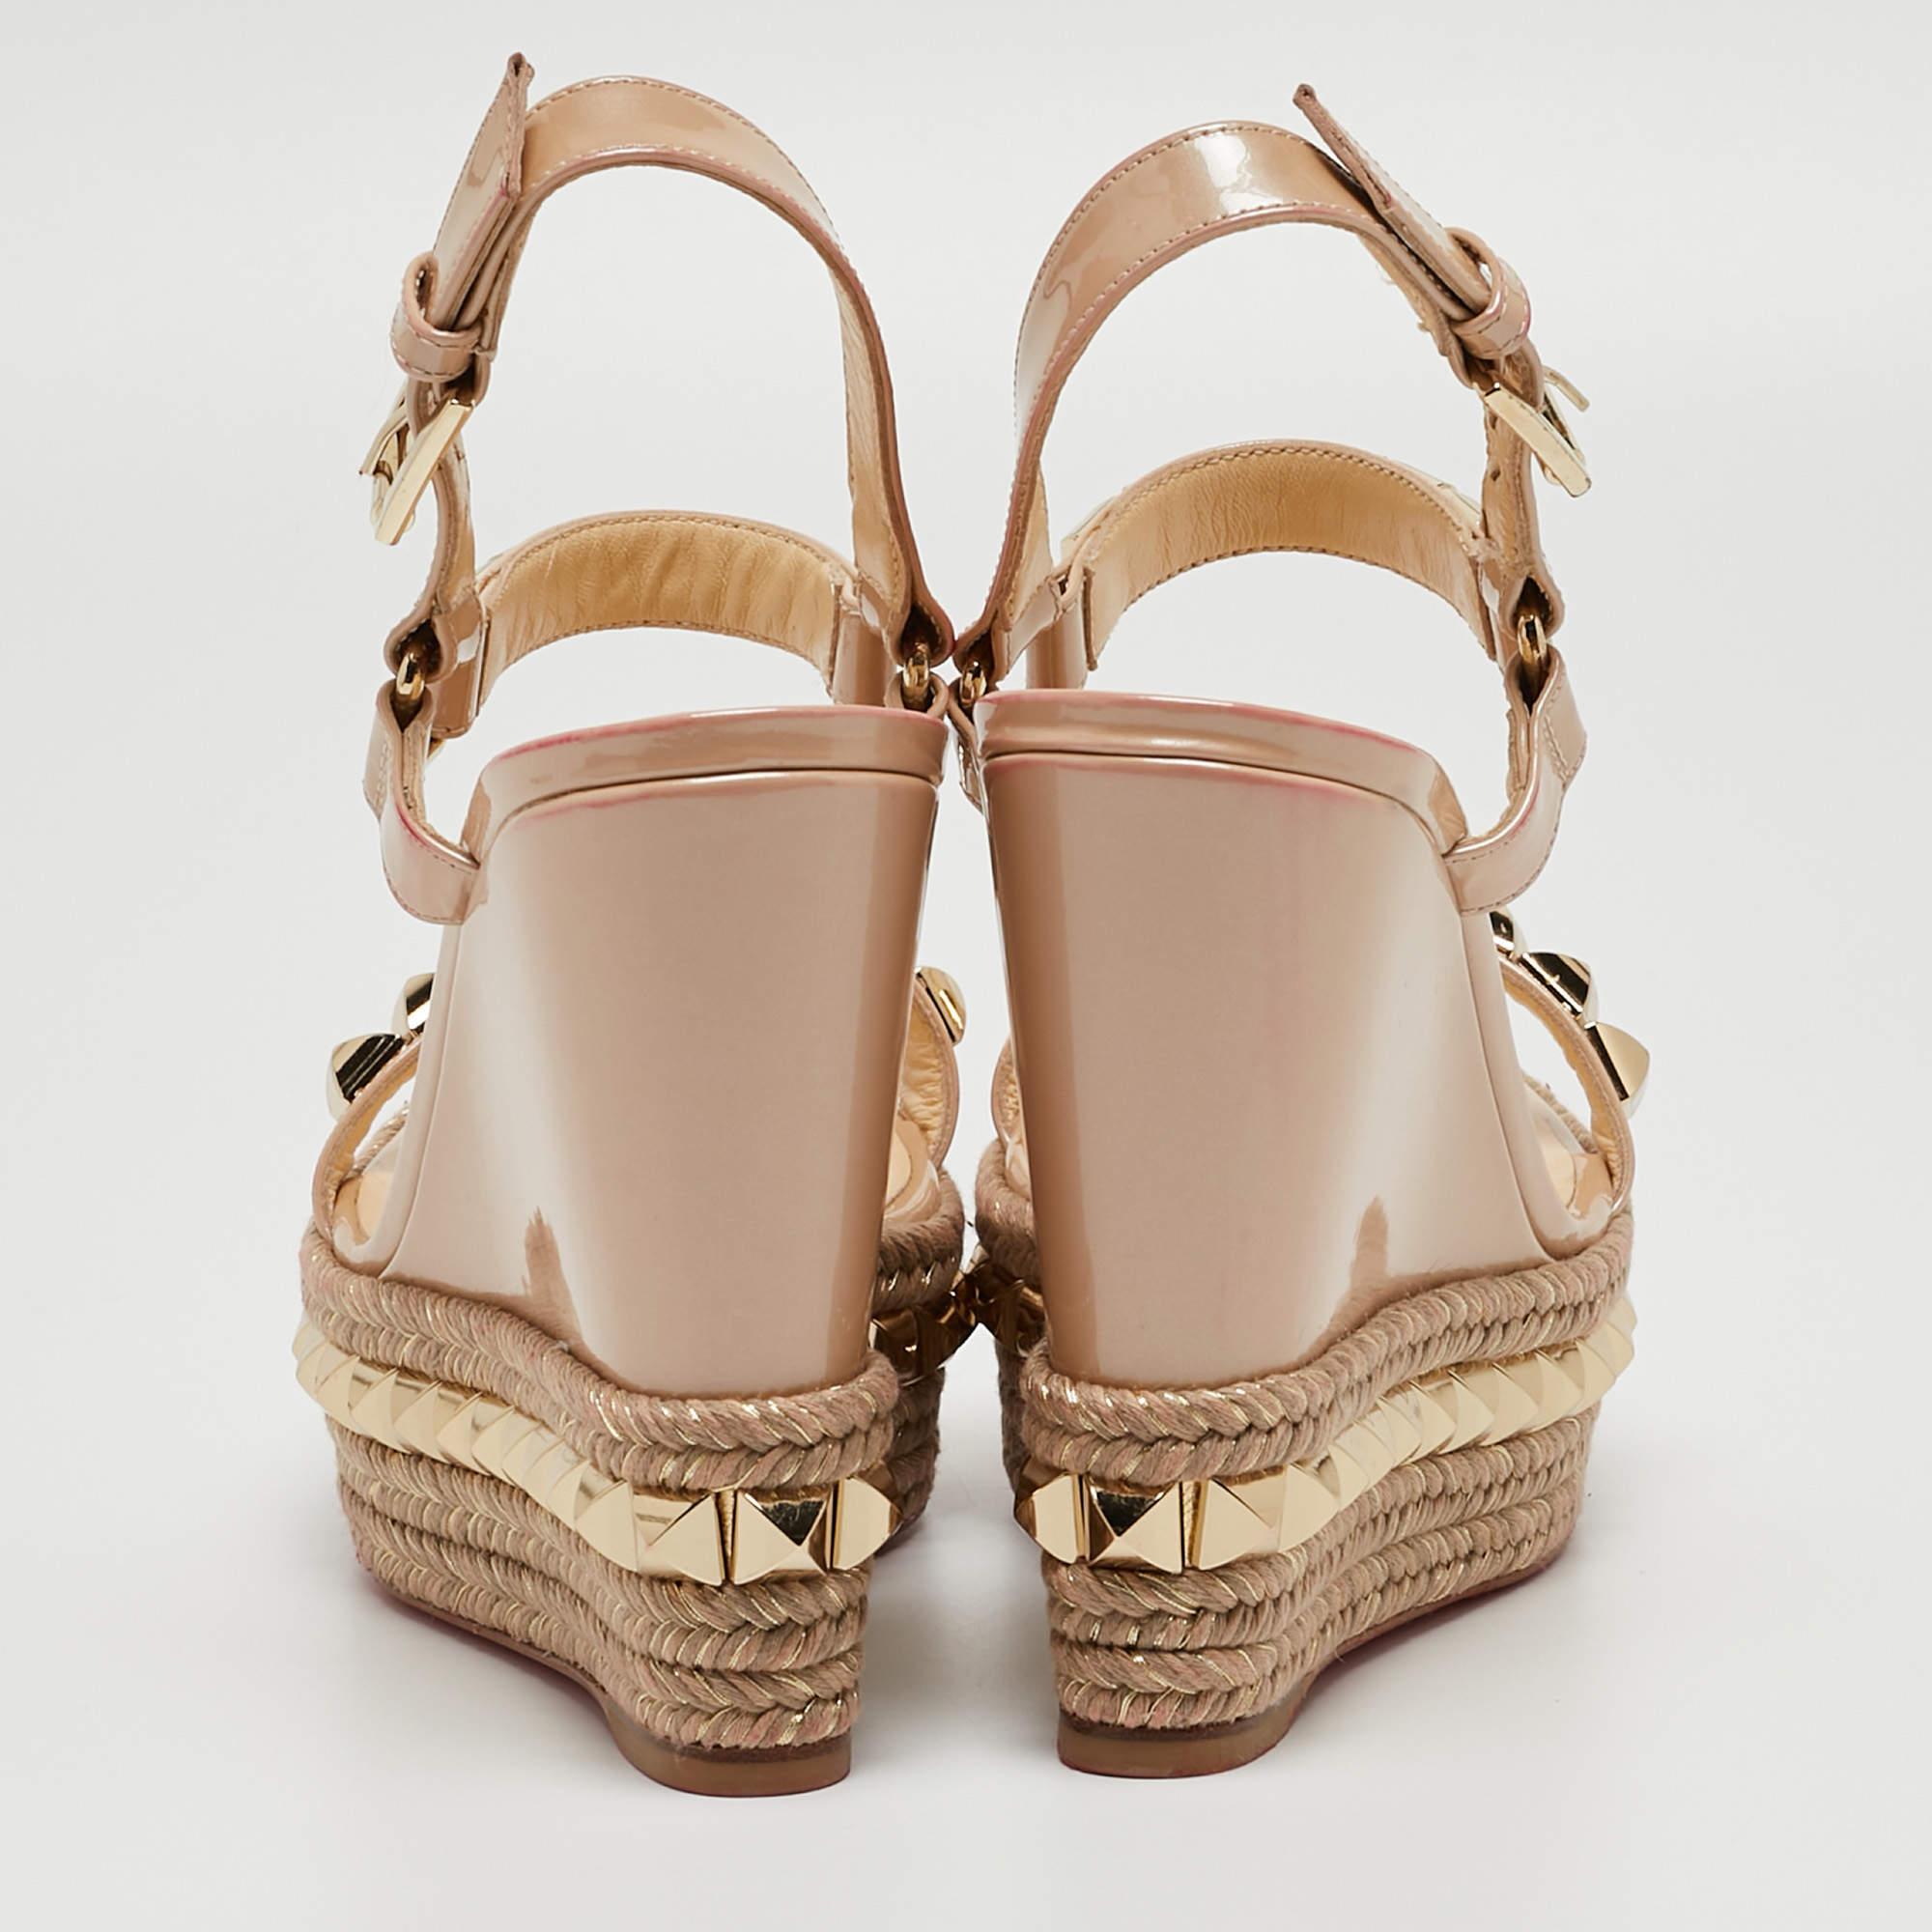 Christian Louboutin Beige Patent Leather Pyraclou Wedge Sandals Size 35 For Sale 5